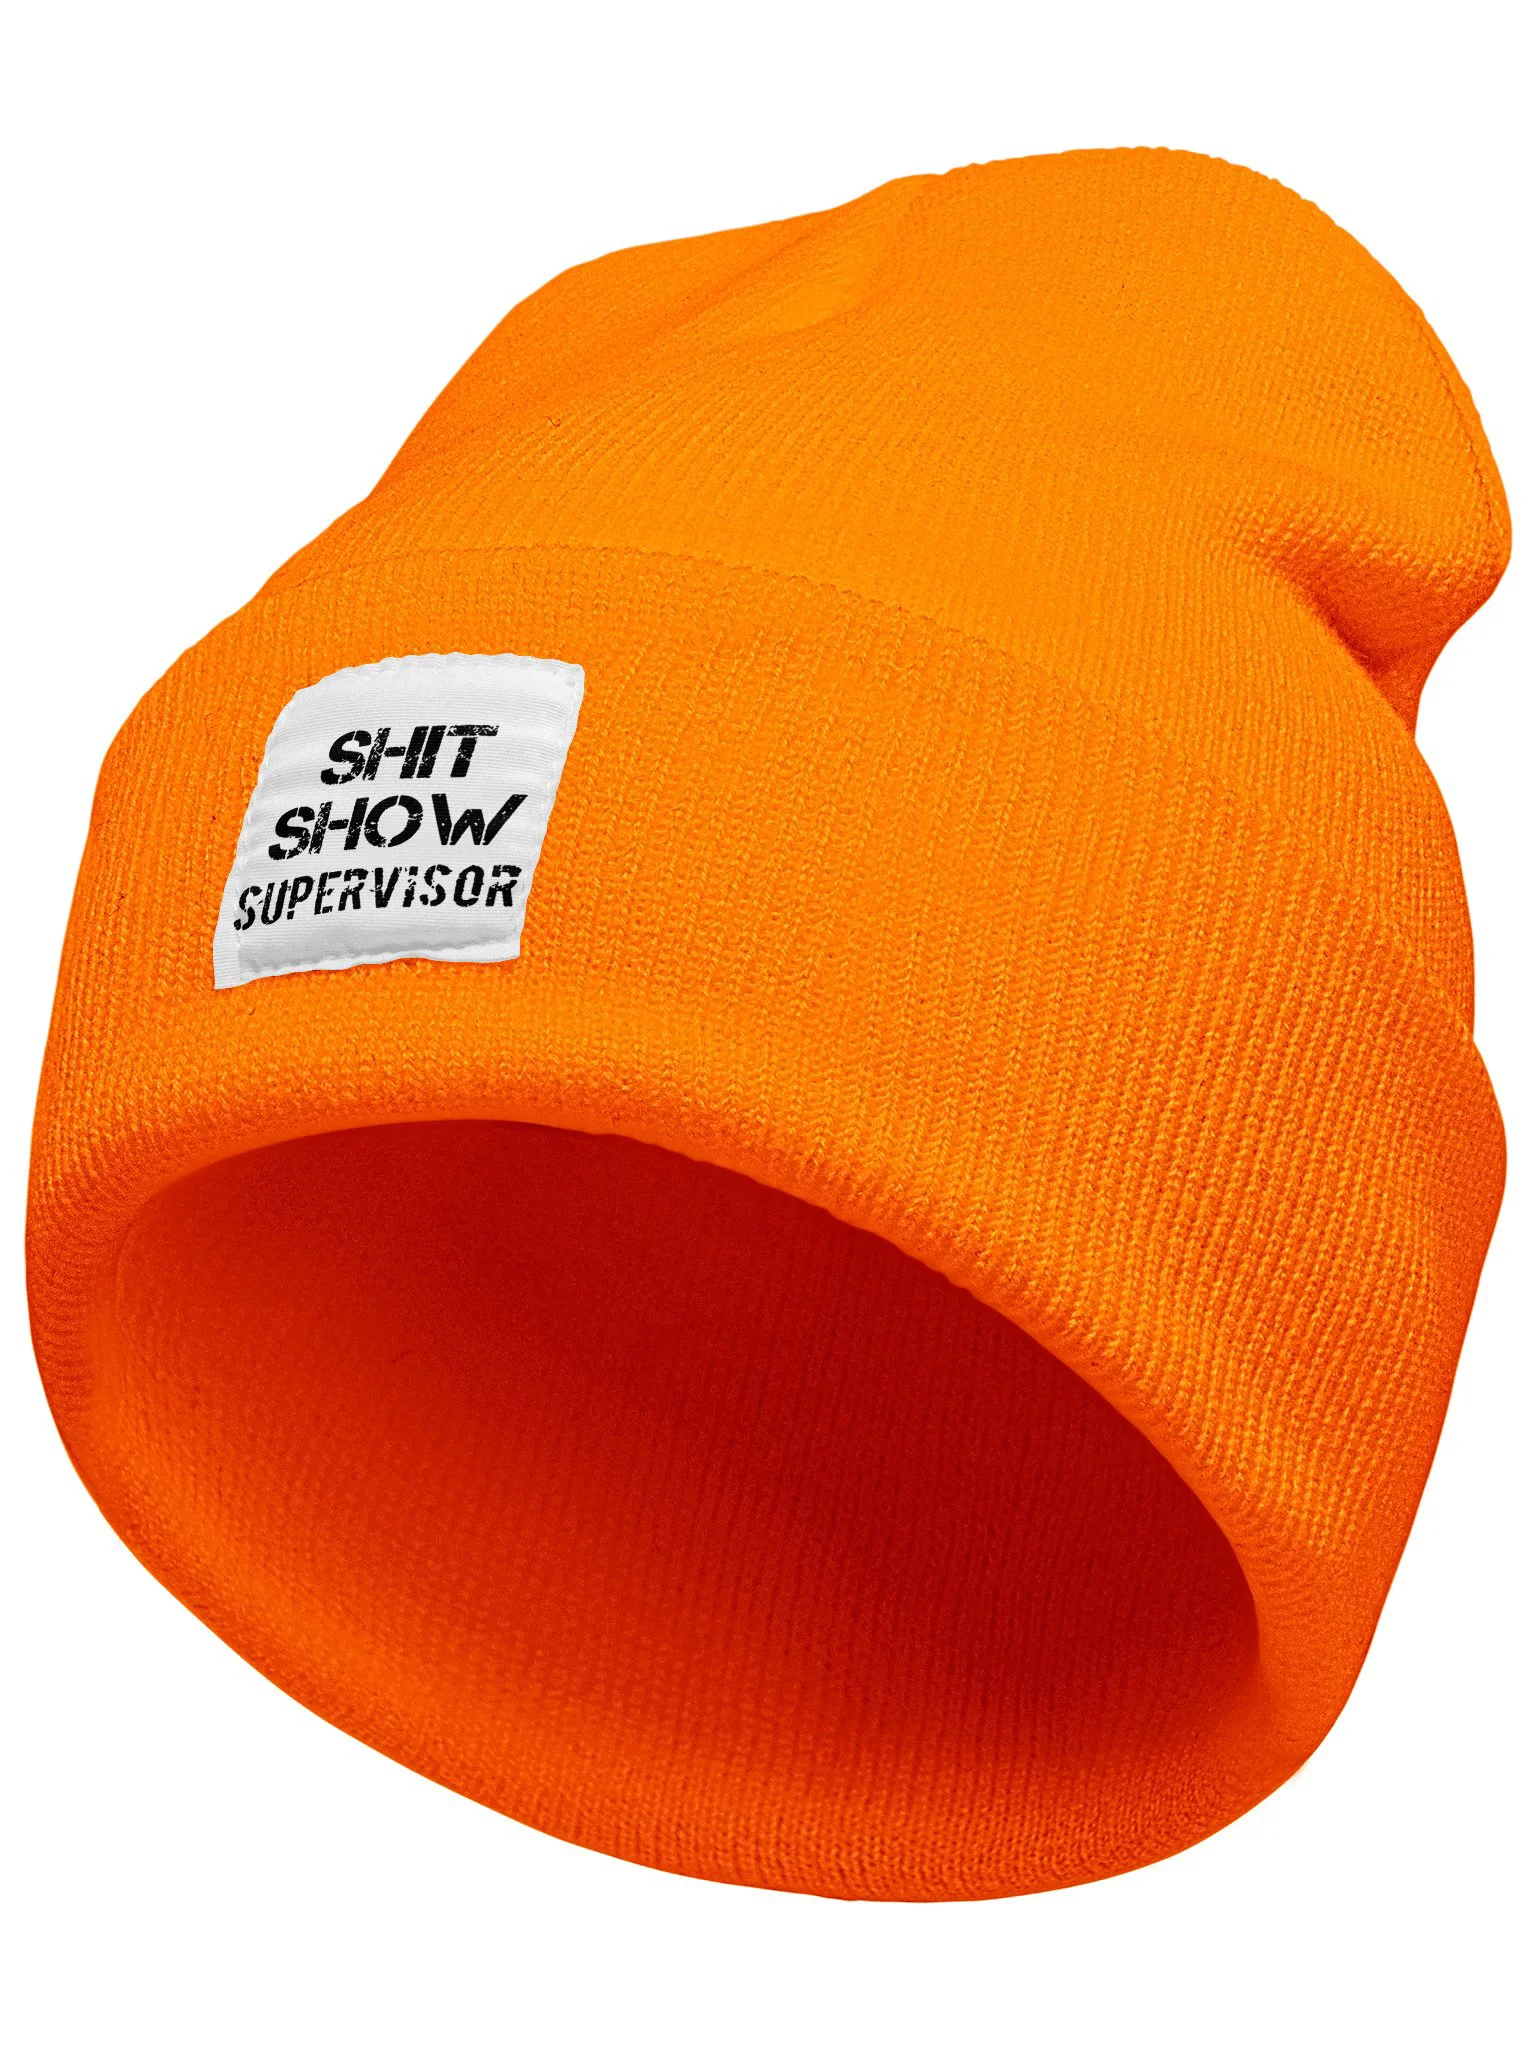 Shit Show Supervisor Funny Text Letter Beanie Hat